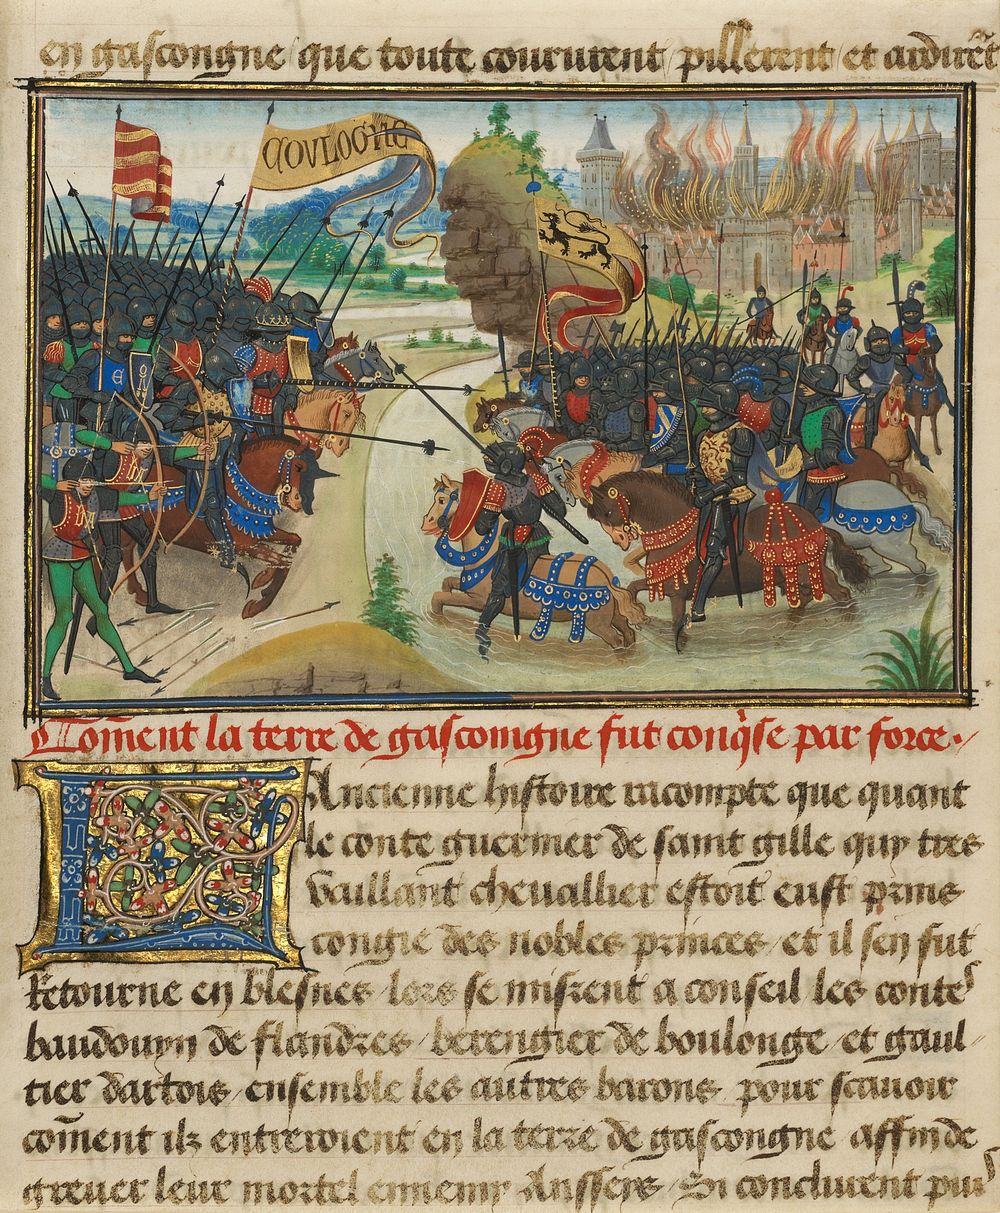 The Conquest of Gasgogne by the Armies of Luxembourg, Boulogne, and Artois by Loyset Liédet and Pol Fruit